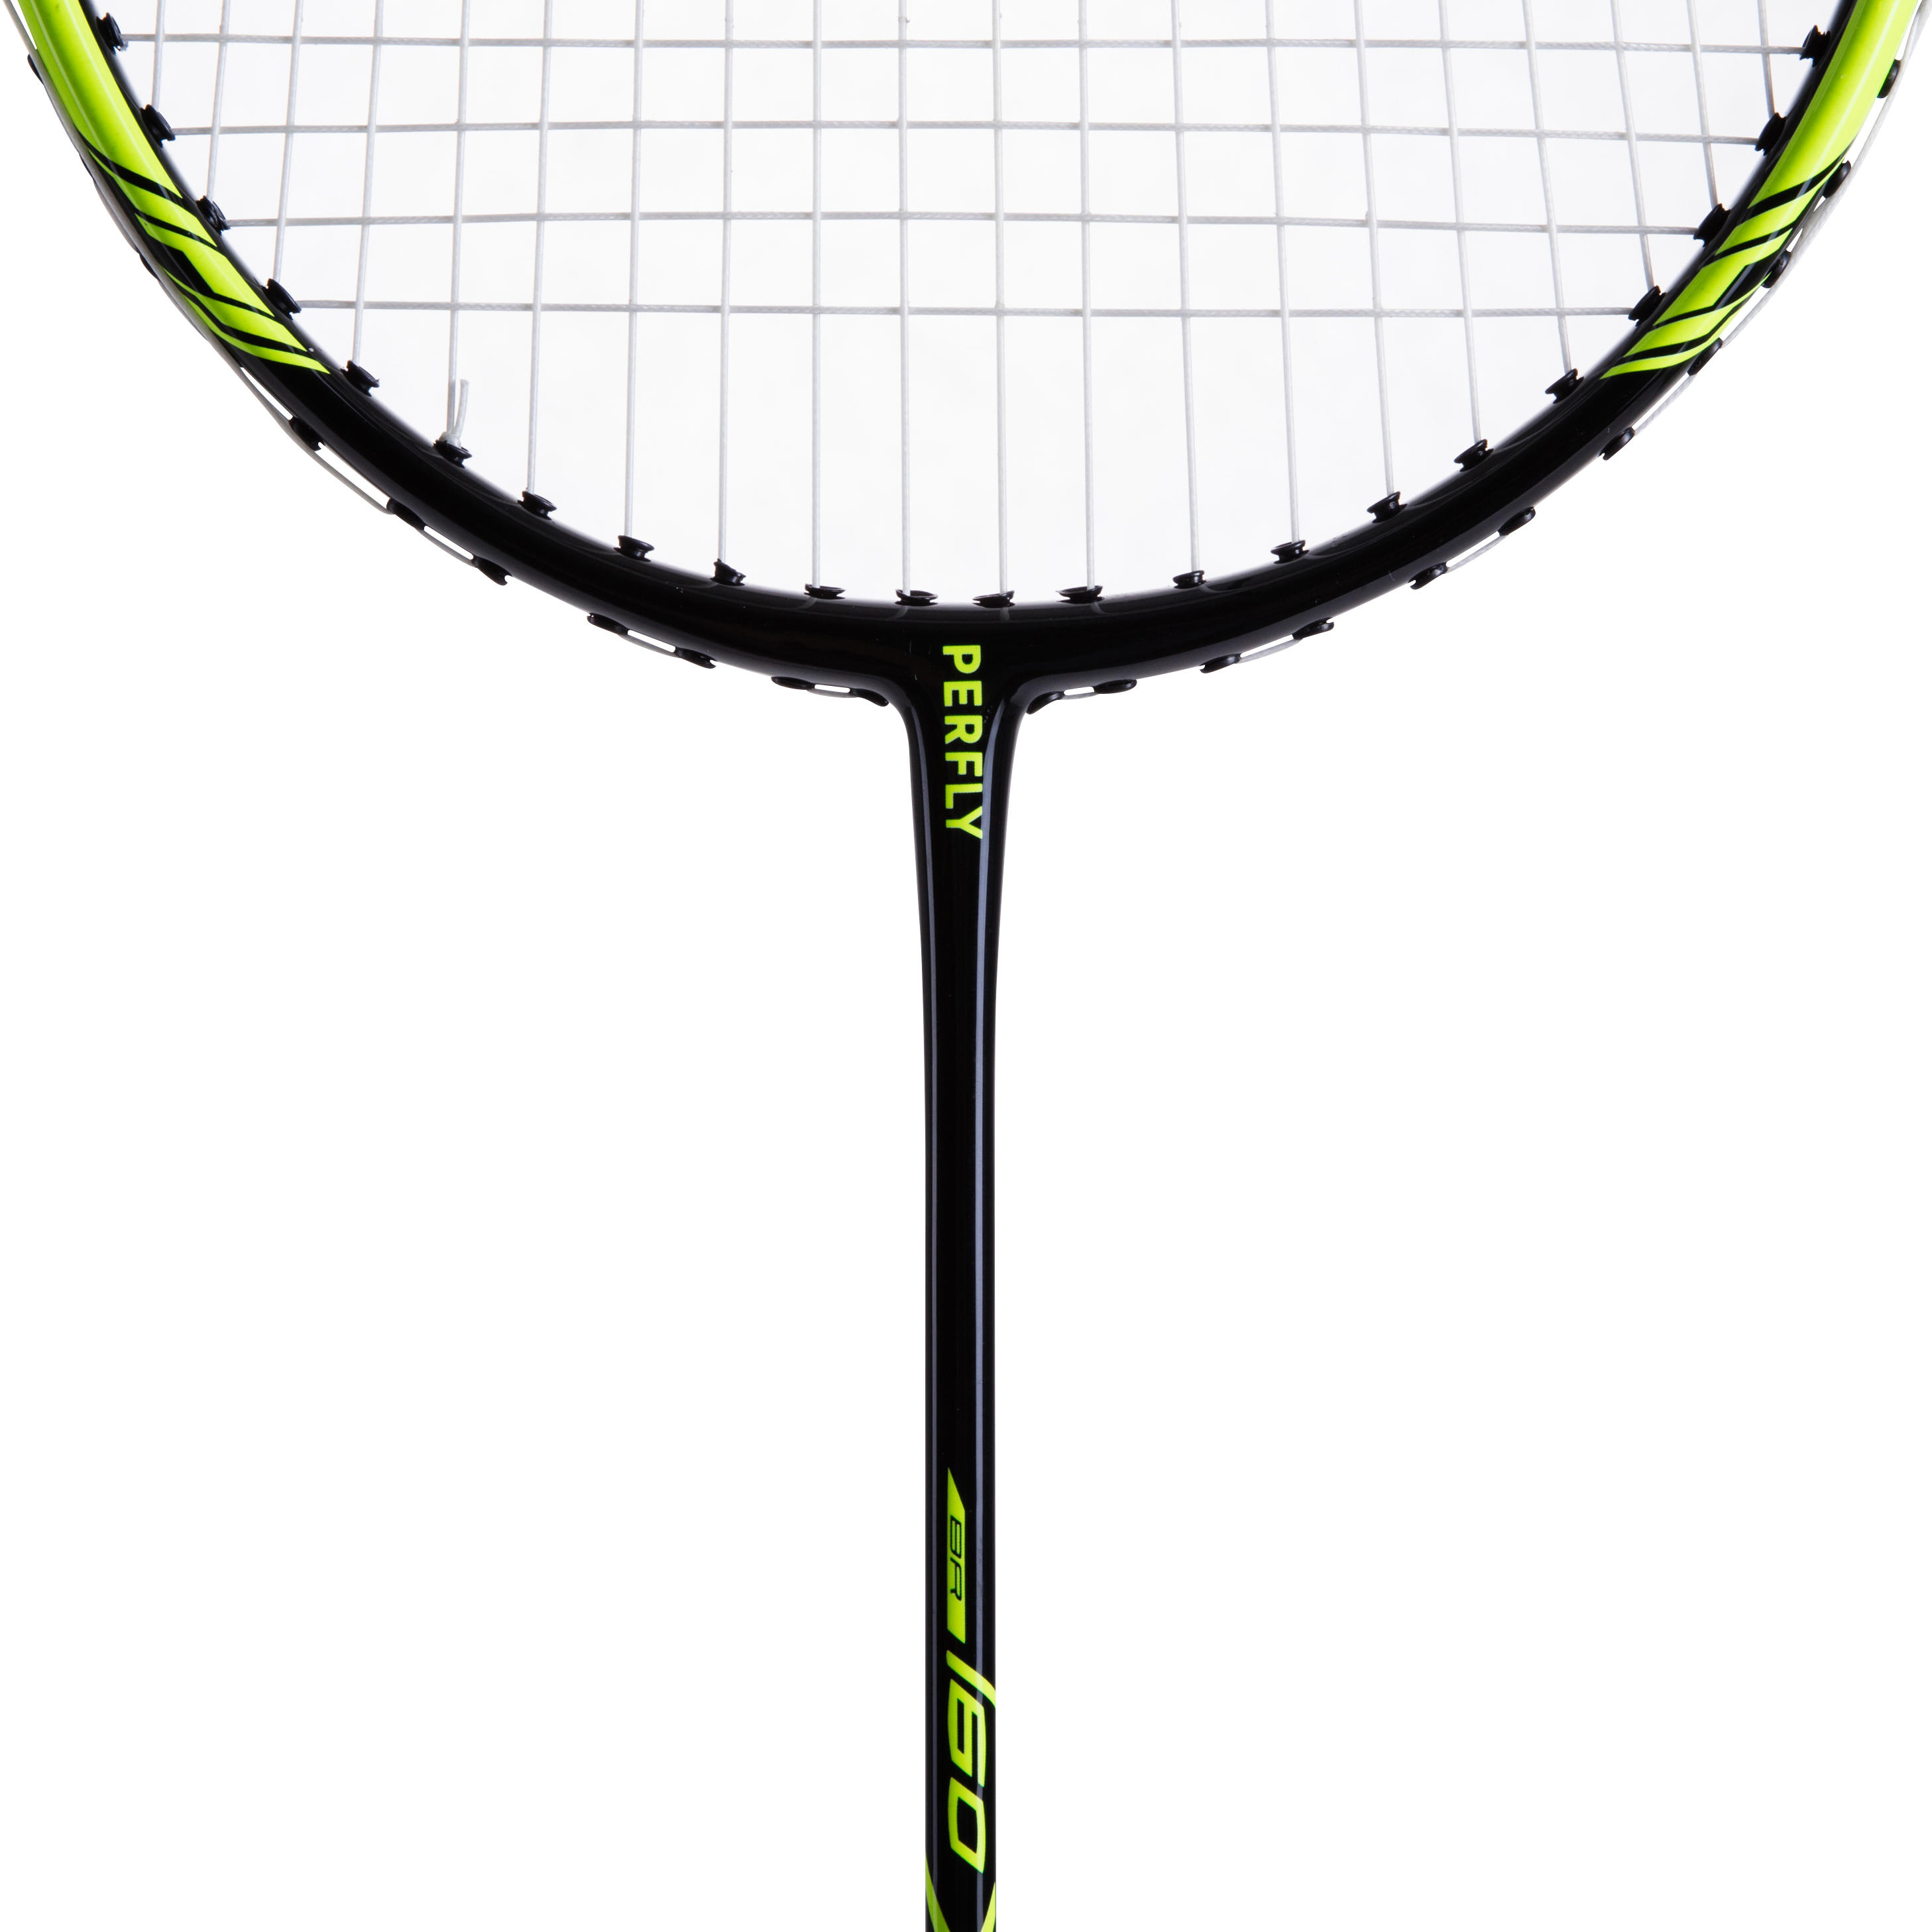 BR160 badminton racquet - Adults - PERFLY